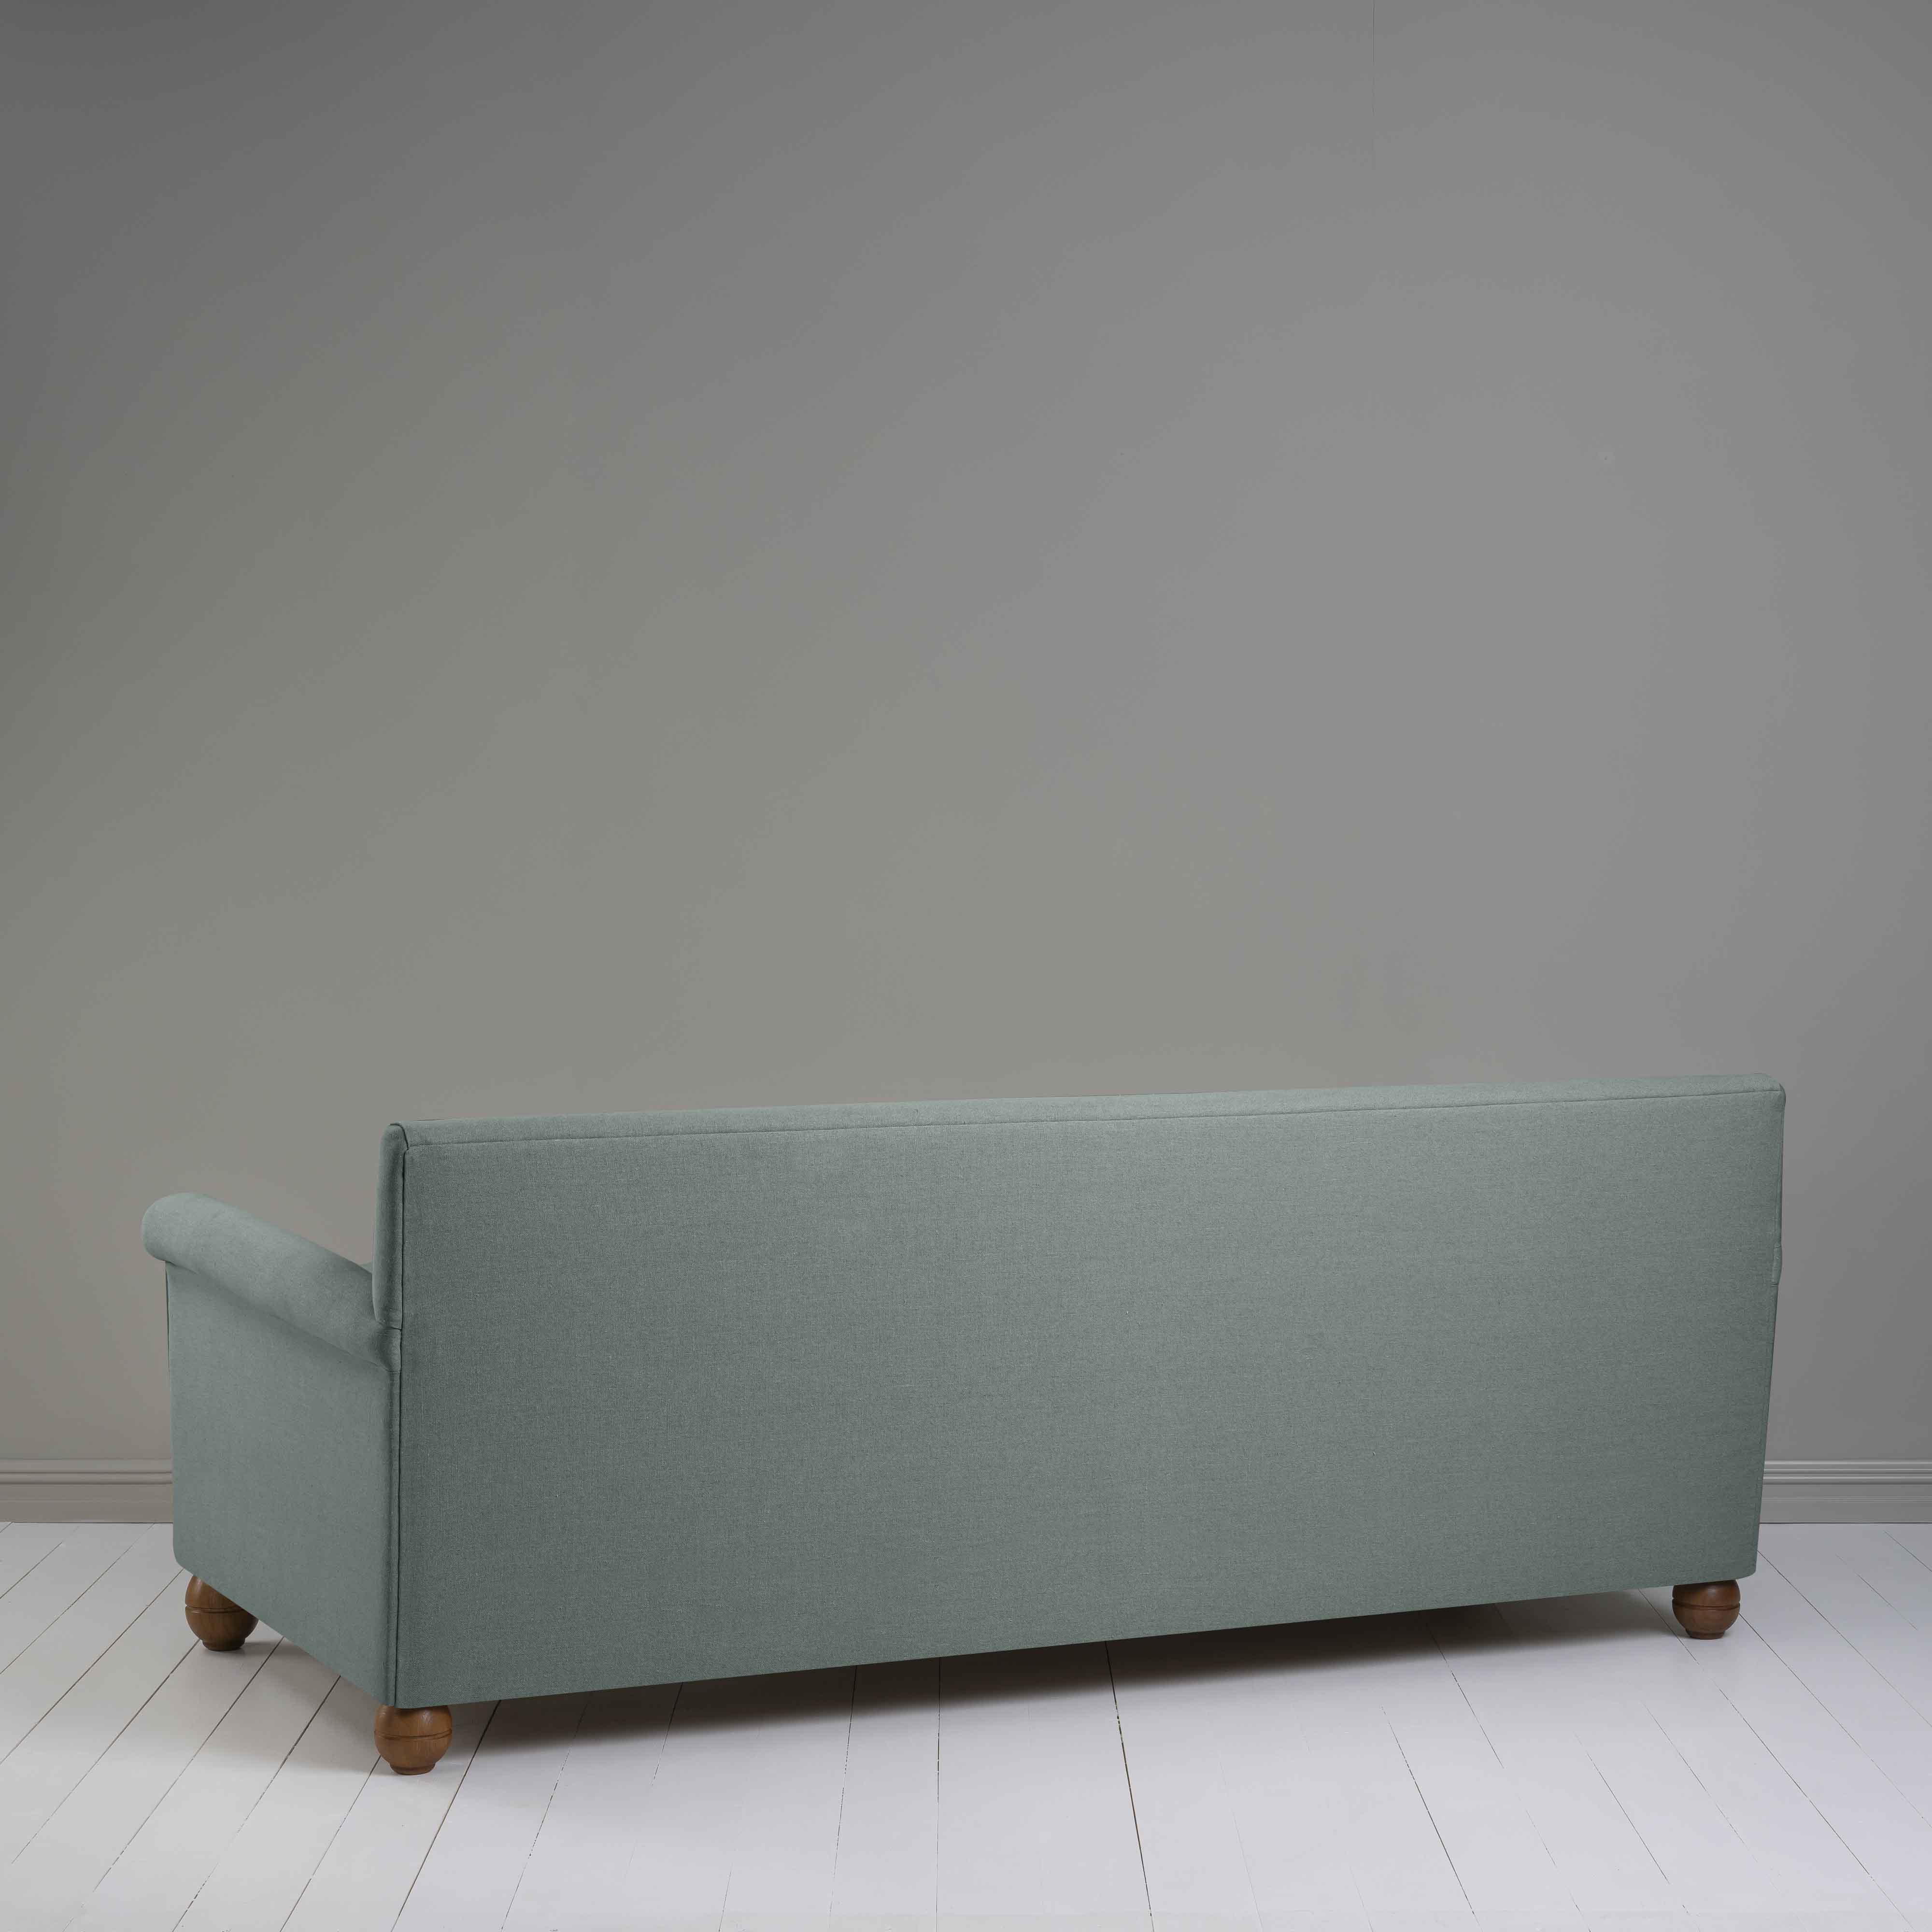  Idler 4 seater sofa in Laidback Linen Mineral 